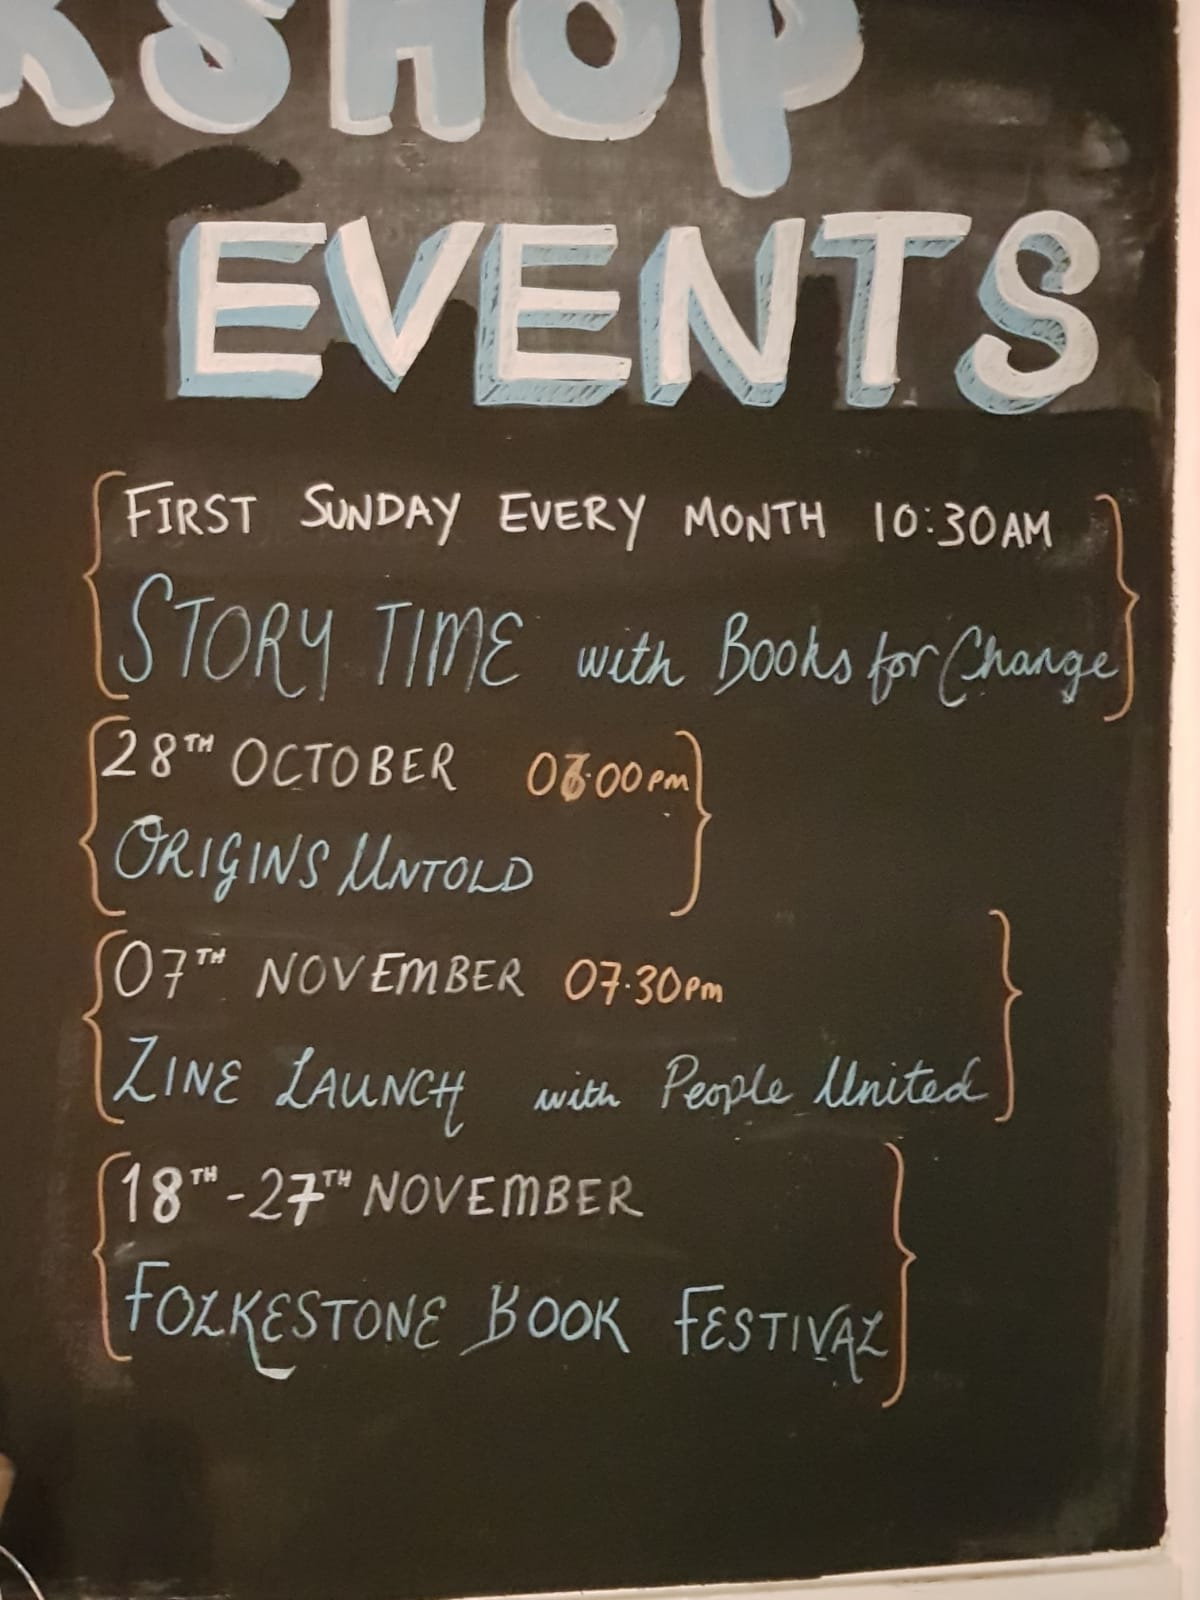 Photo of a large chalk board with part of the Folkestone Bookshop logo drawn at the top and a list of events underneath, including 